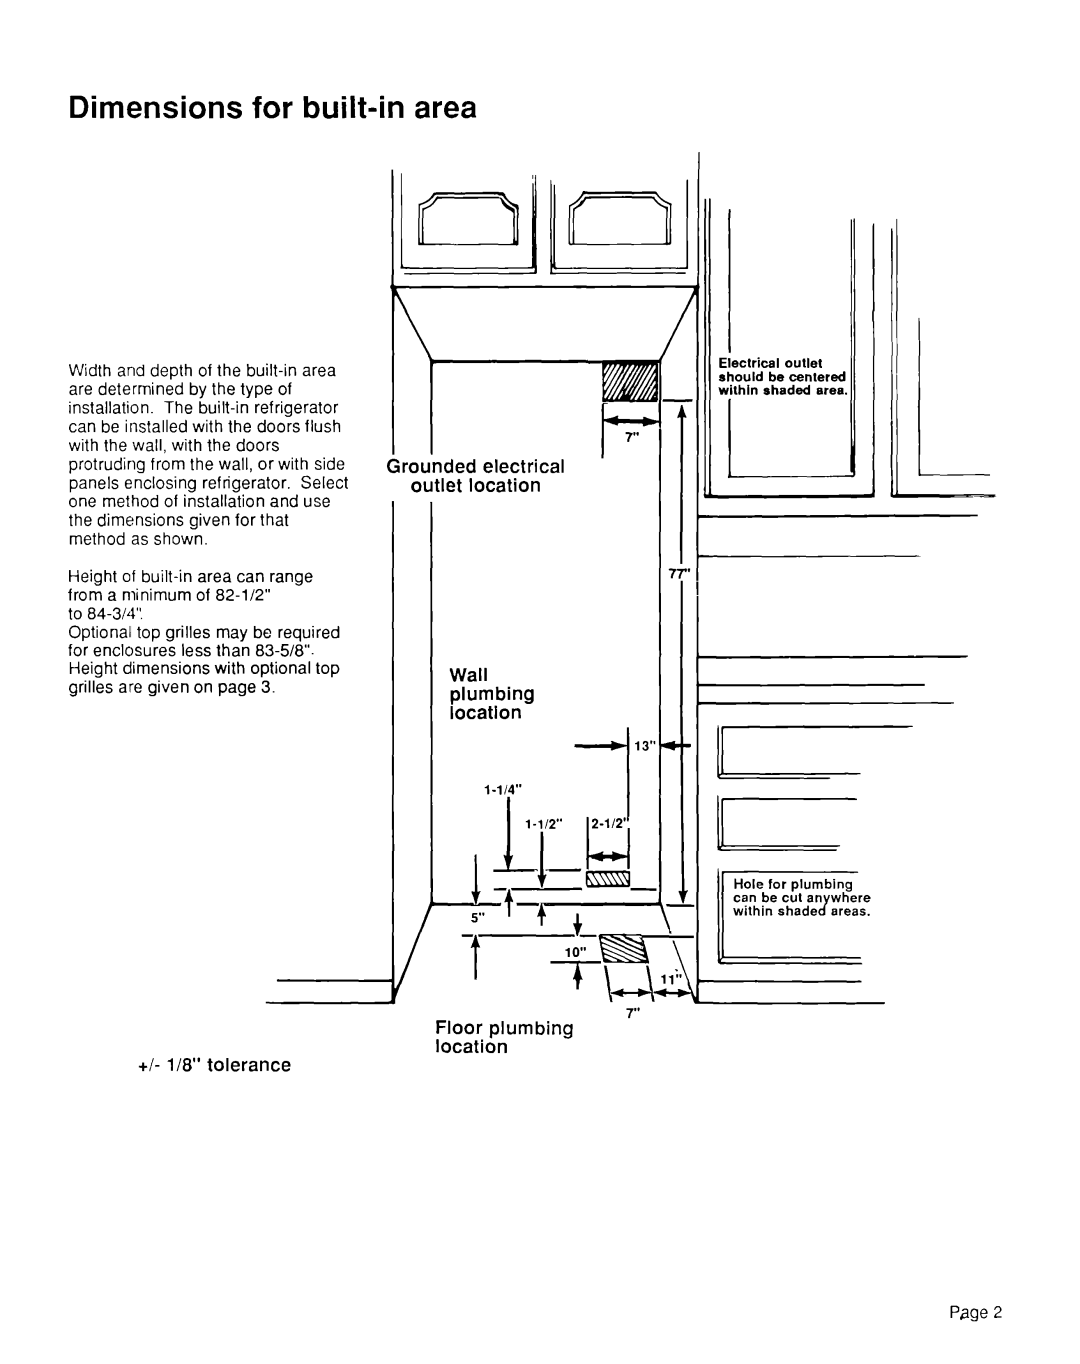 KitchenAid KSRF42DT Dimensions for built-in area, +/- l/8” tolerance, Page, Floor plumbing location 